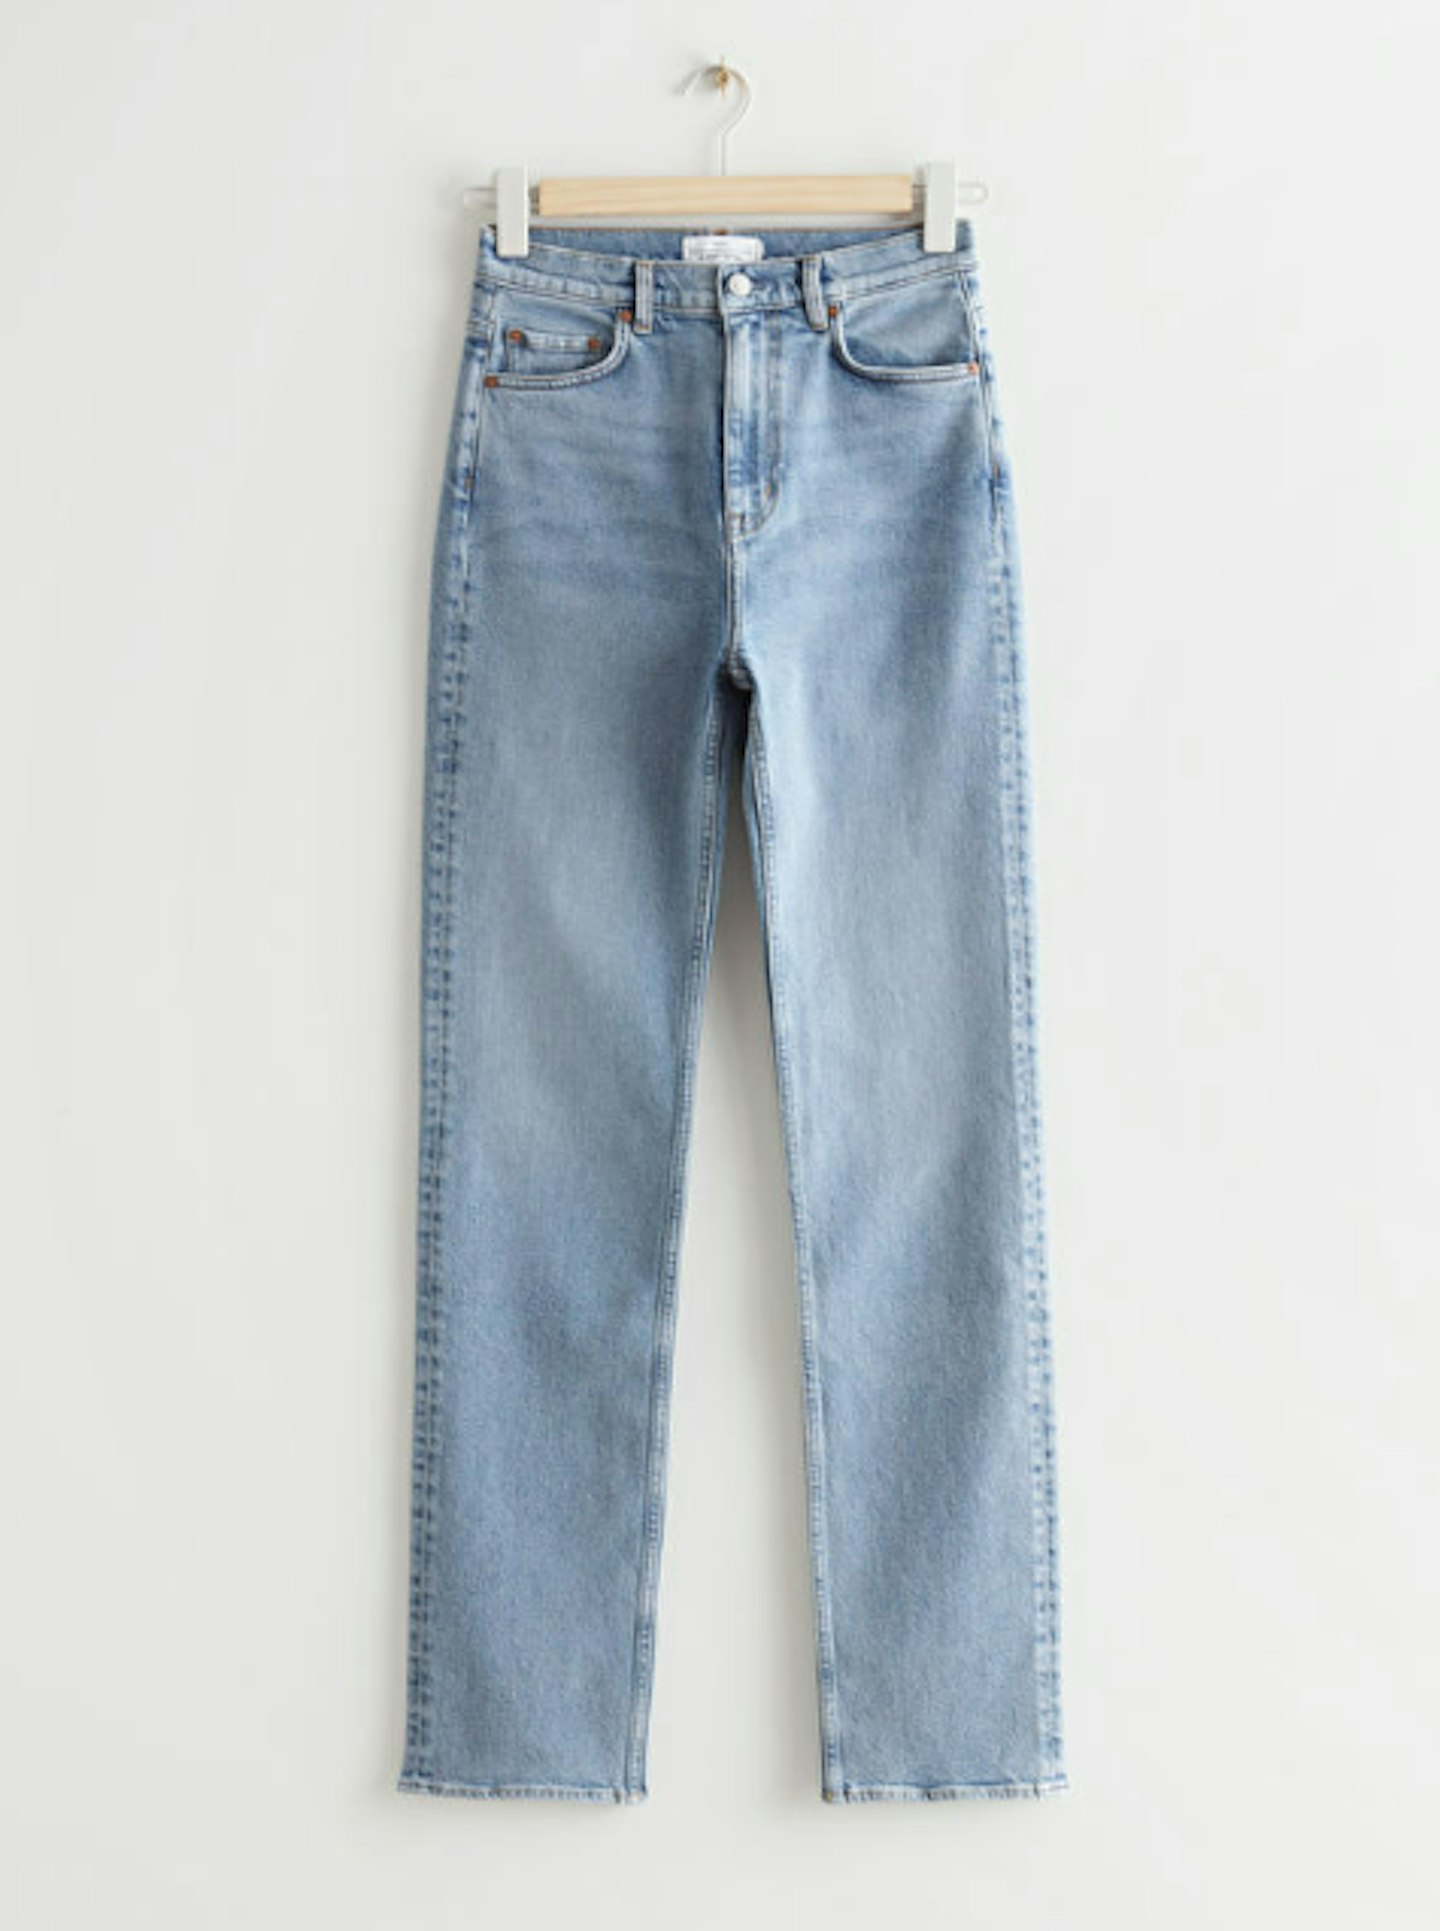 & Other Stories, Favourite Cut Jeans